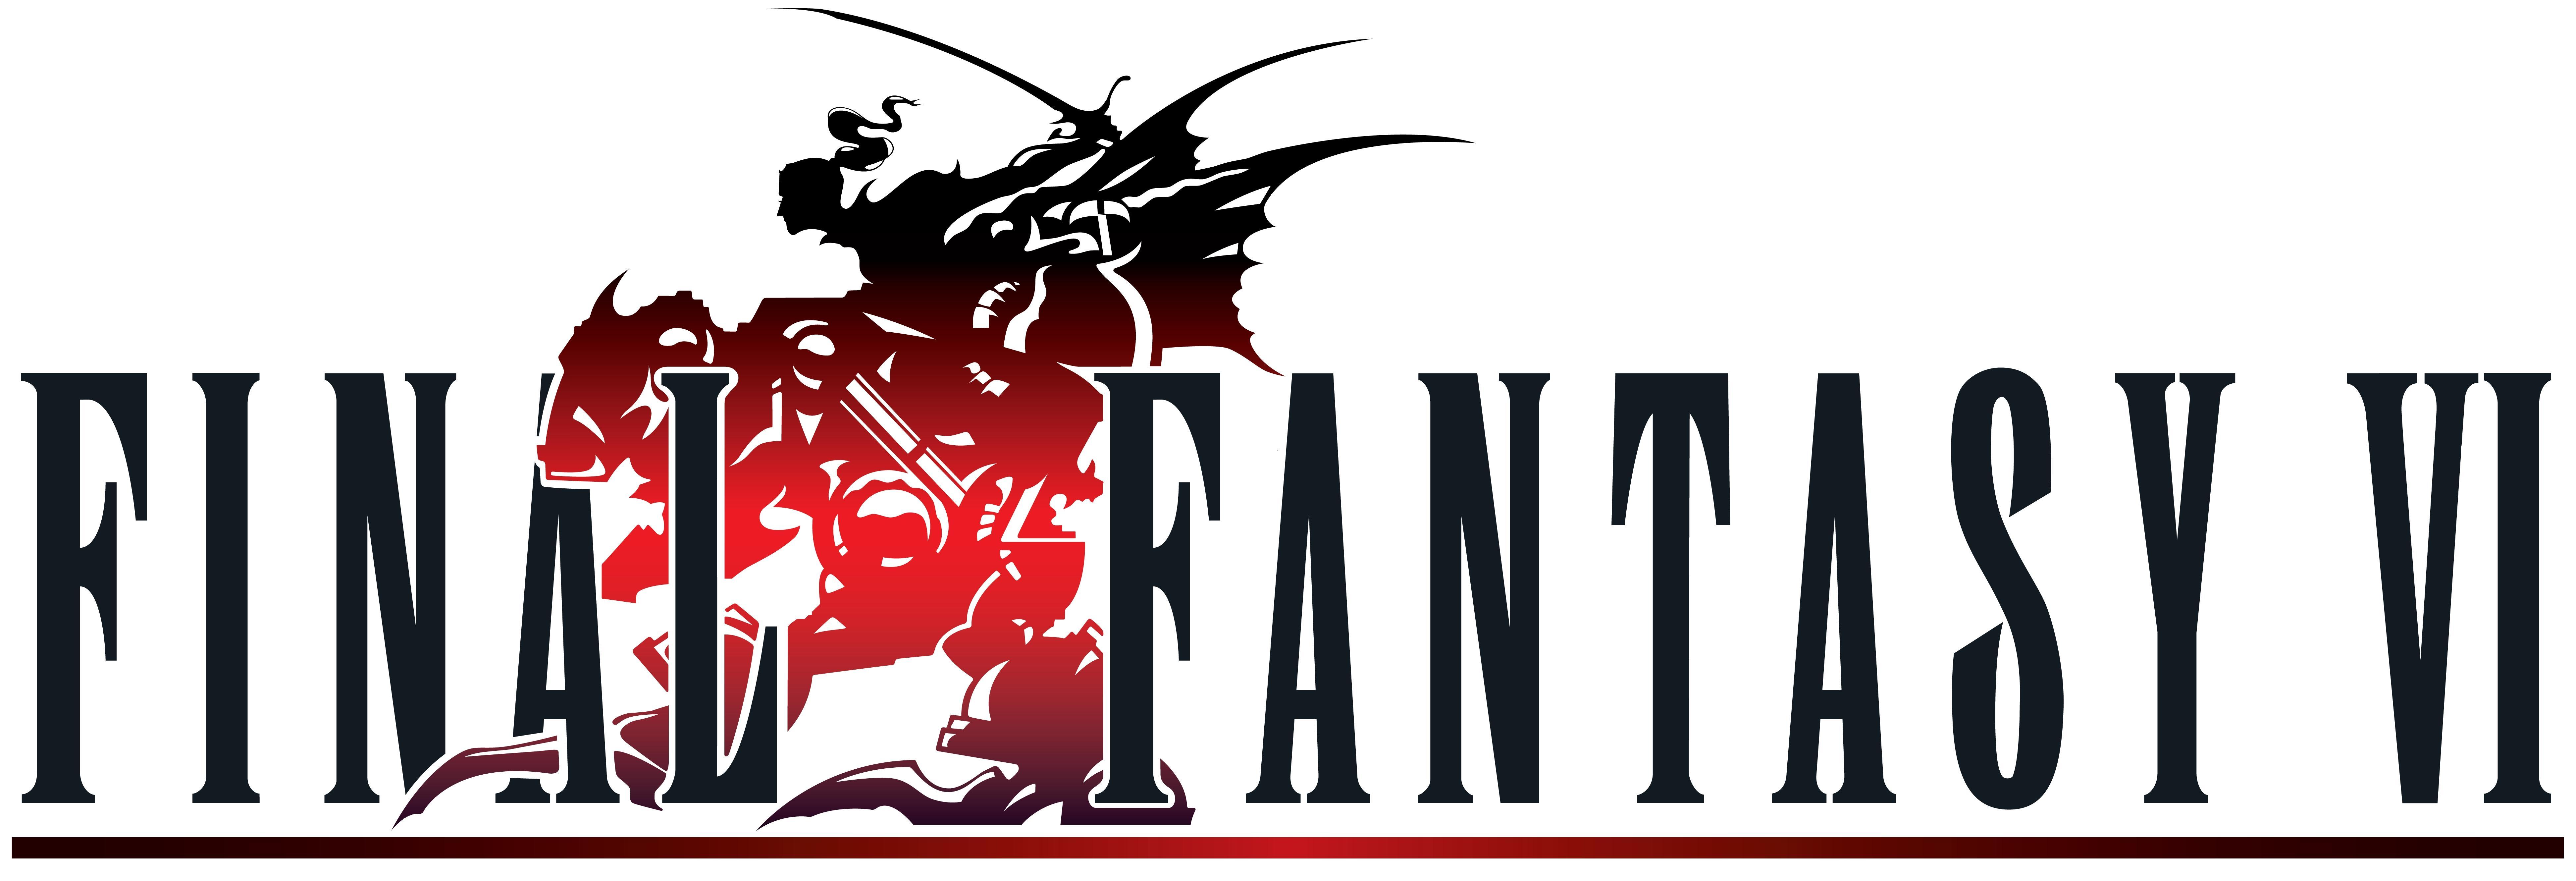 Final Fantasy 6 Wallpapers  Top Free Final Fantasy 6 Backgrounds   WallpaperAccess